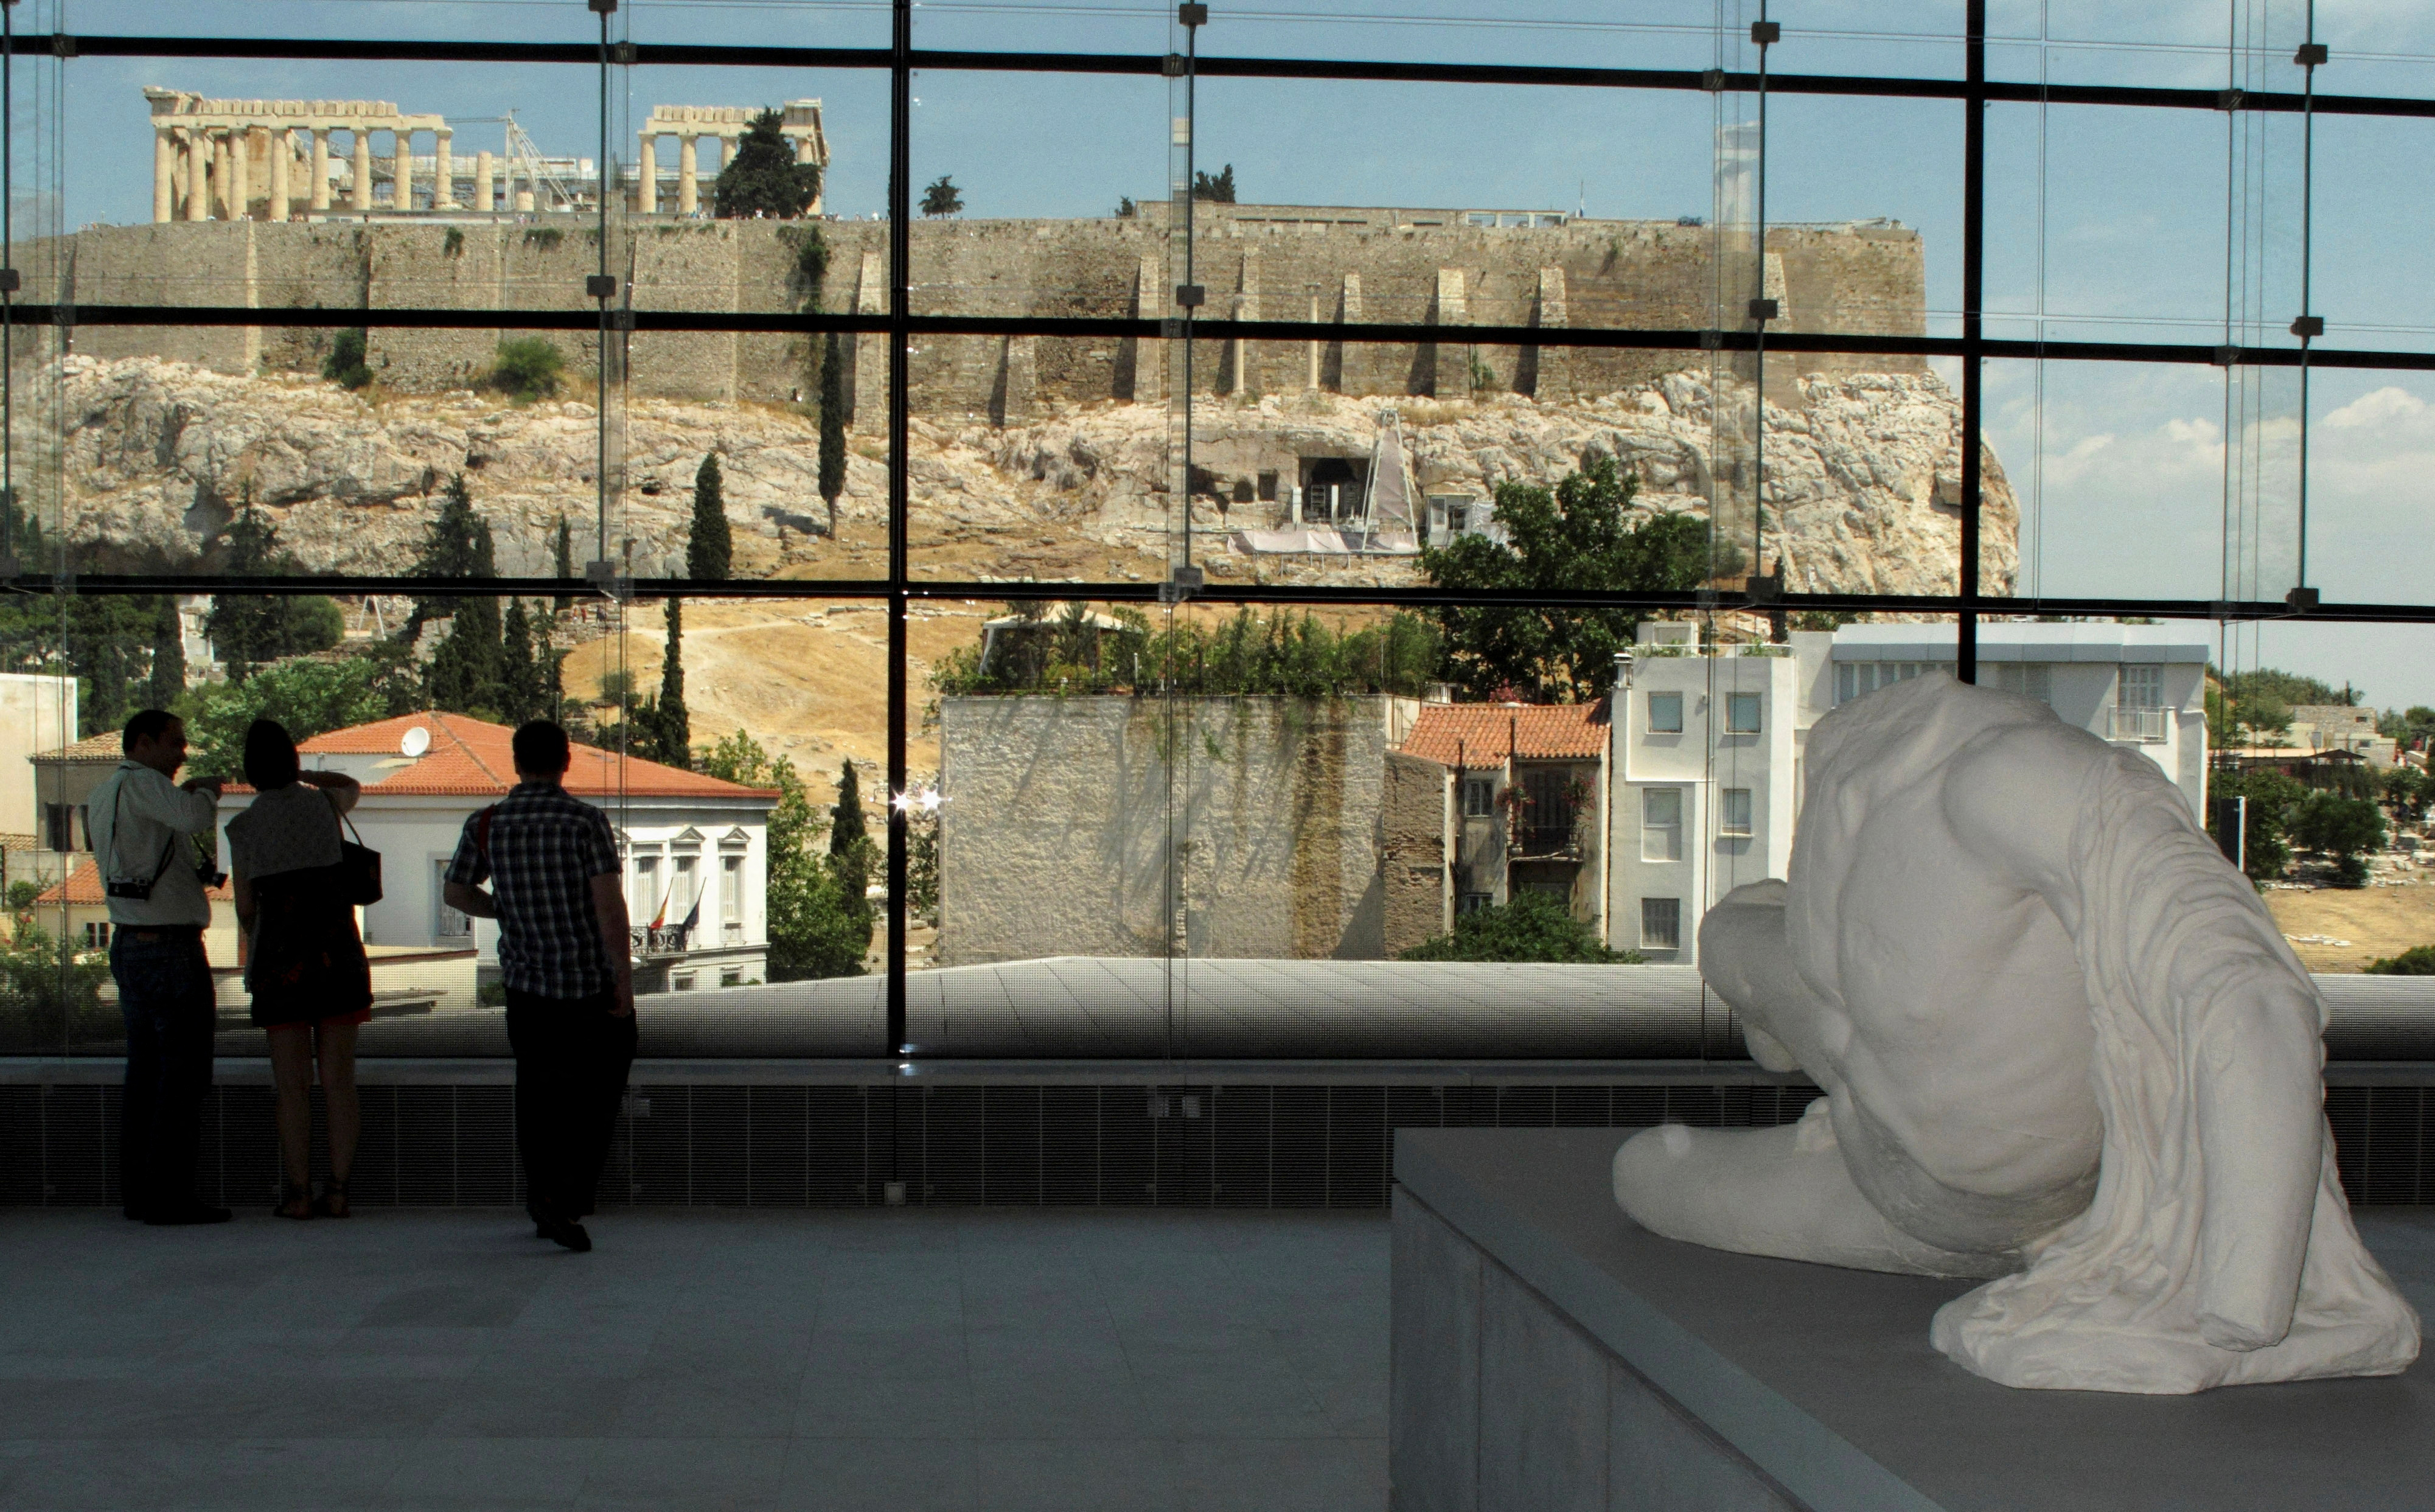 Visitors look at the temple of the Parthenon from inside the new Acropolis museum in Athens